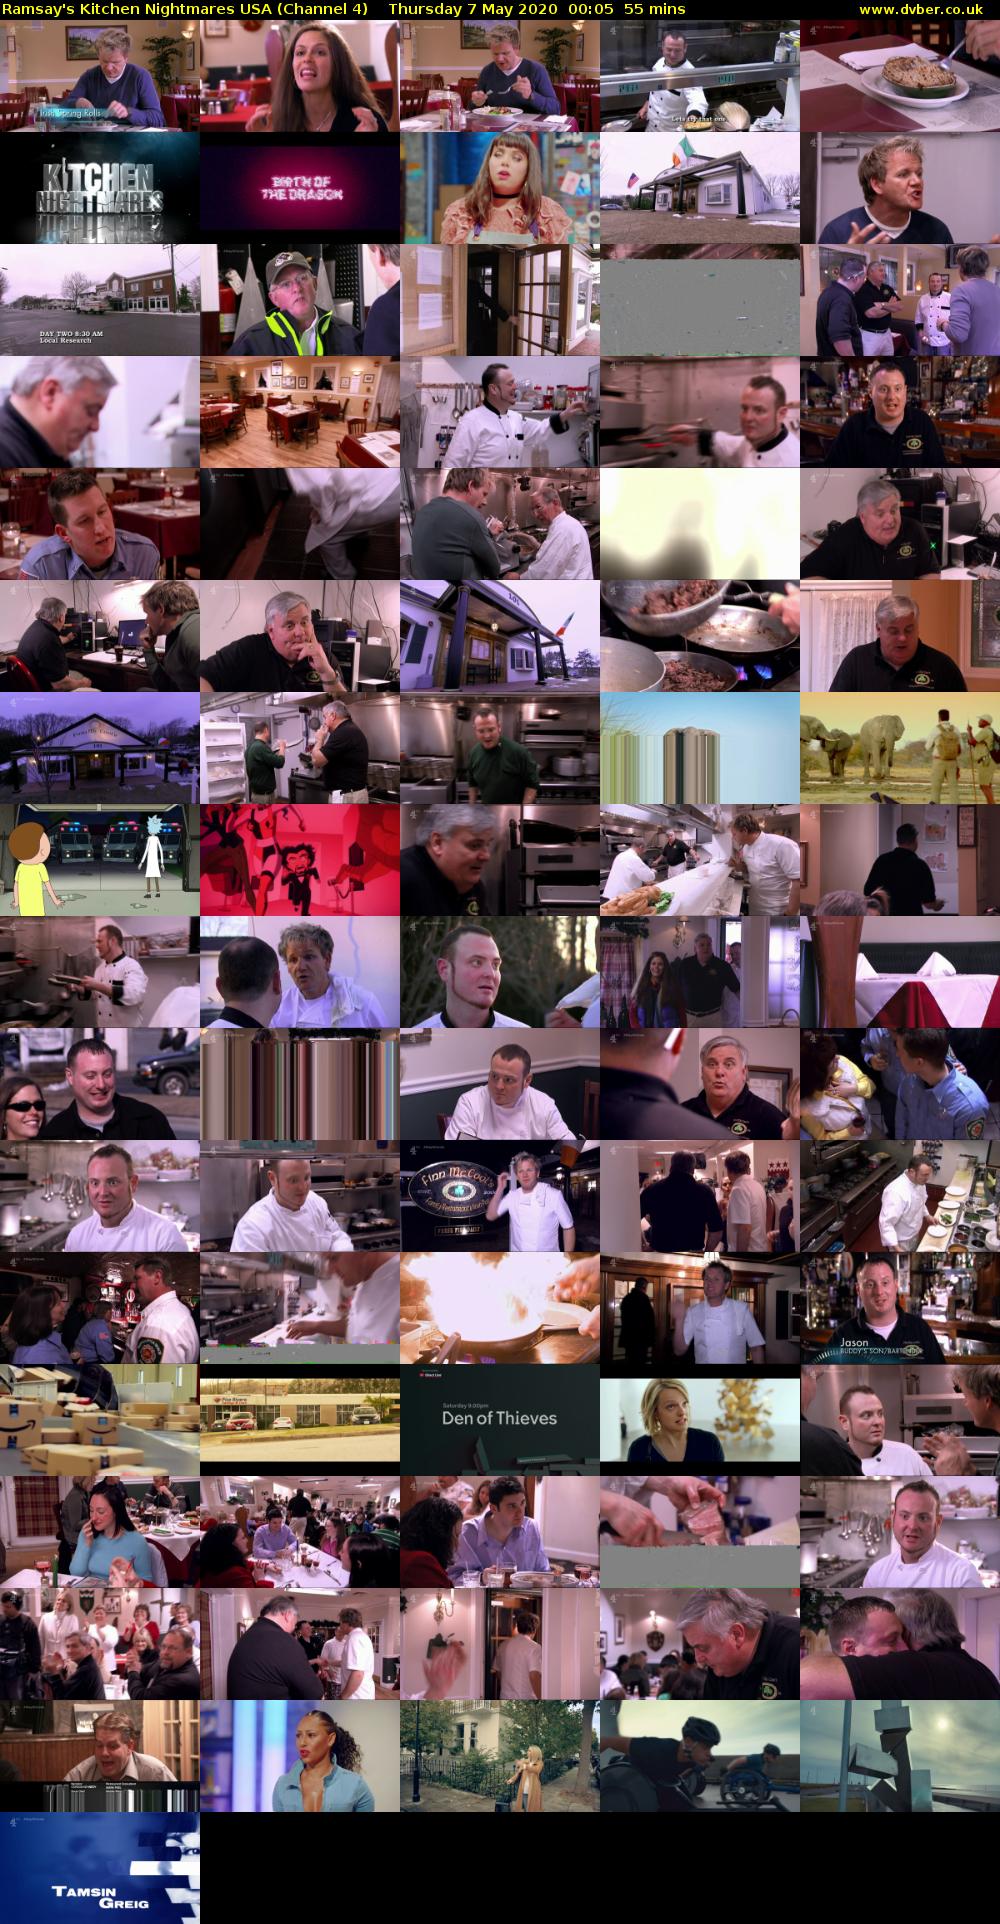 Ramsay's Kitchen Nightmares USA (Channel 4) Thursday 7 May 2020 00:05 - 01:00